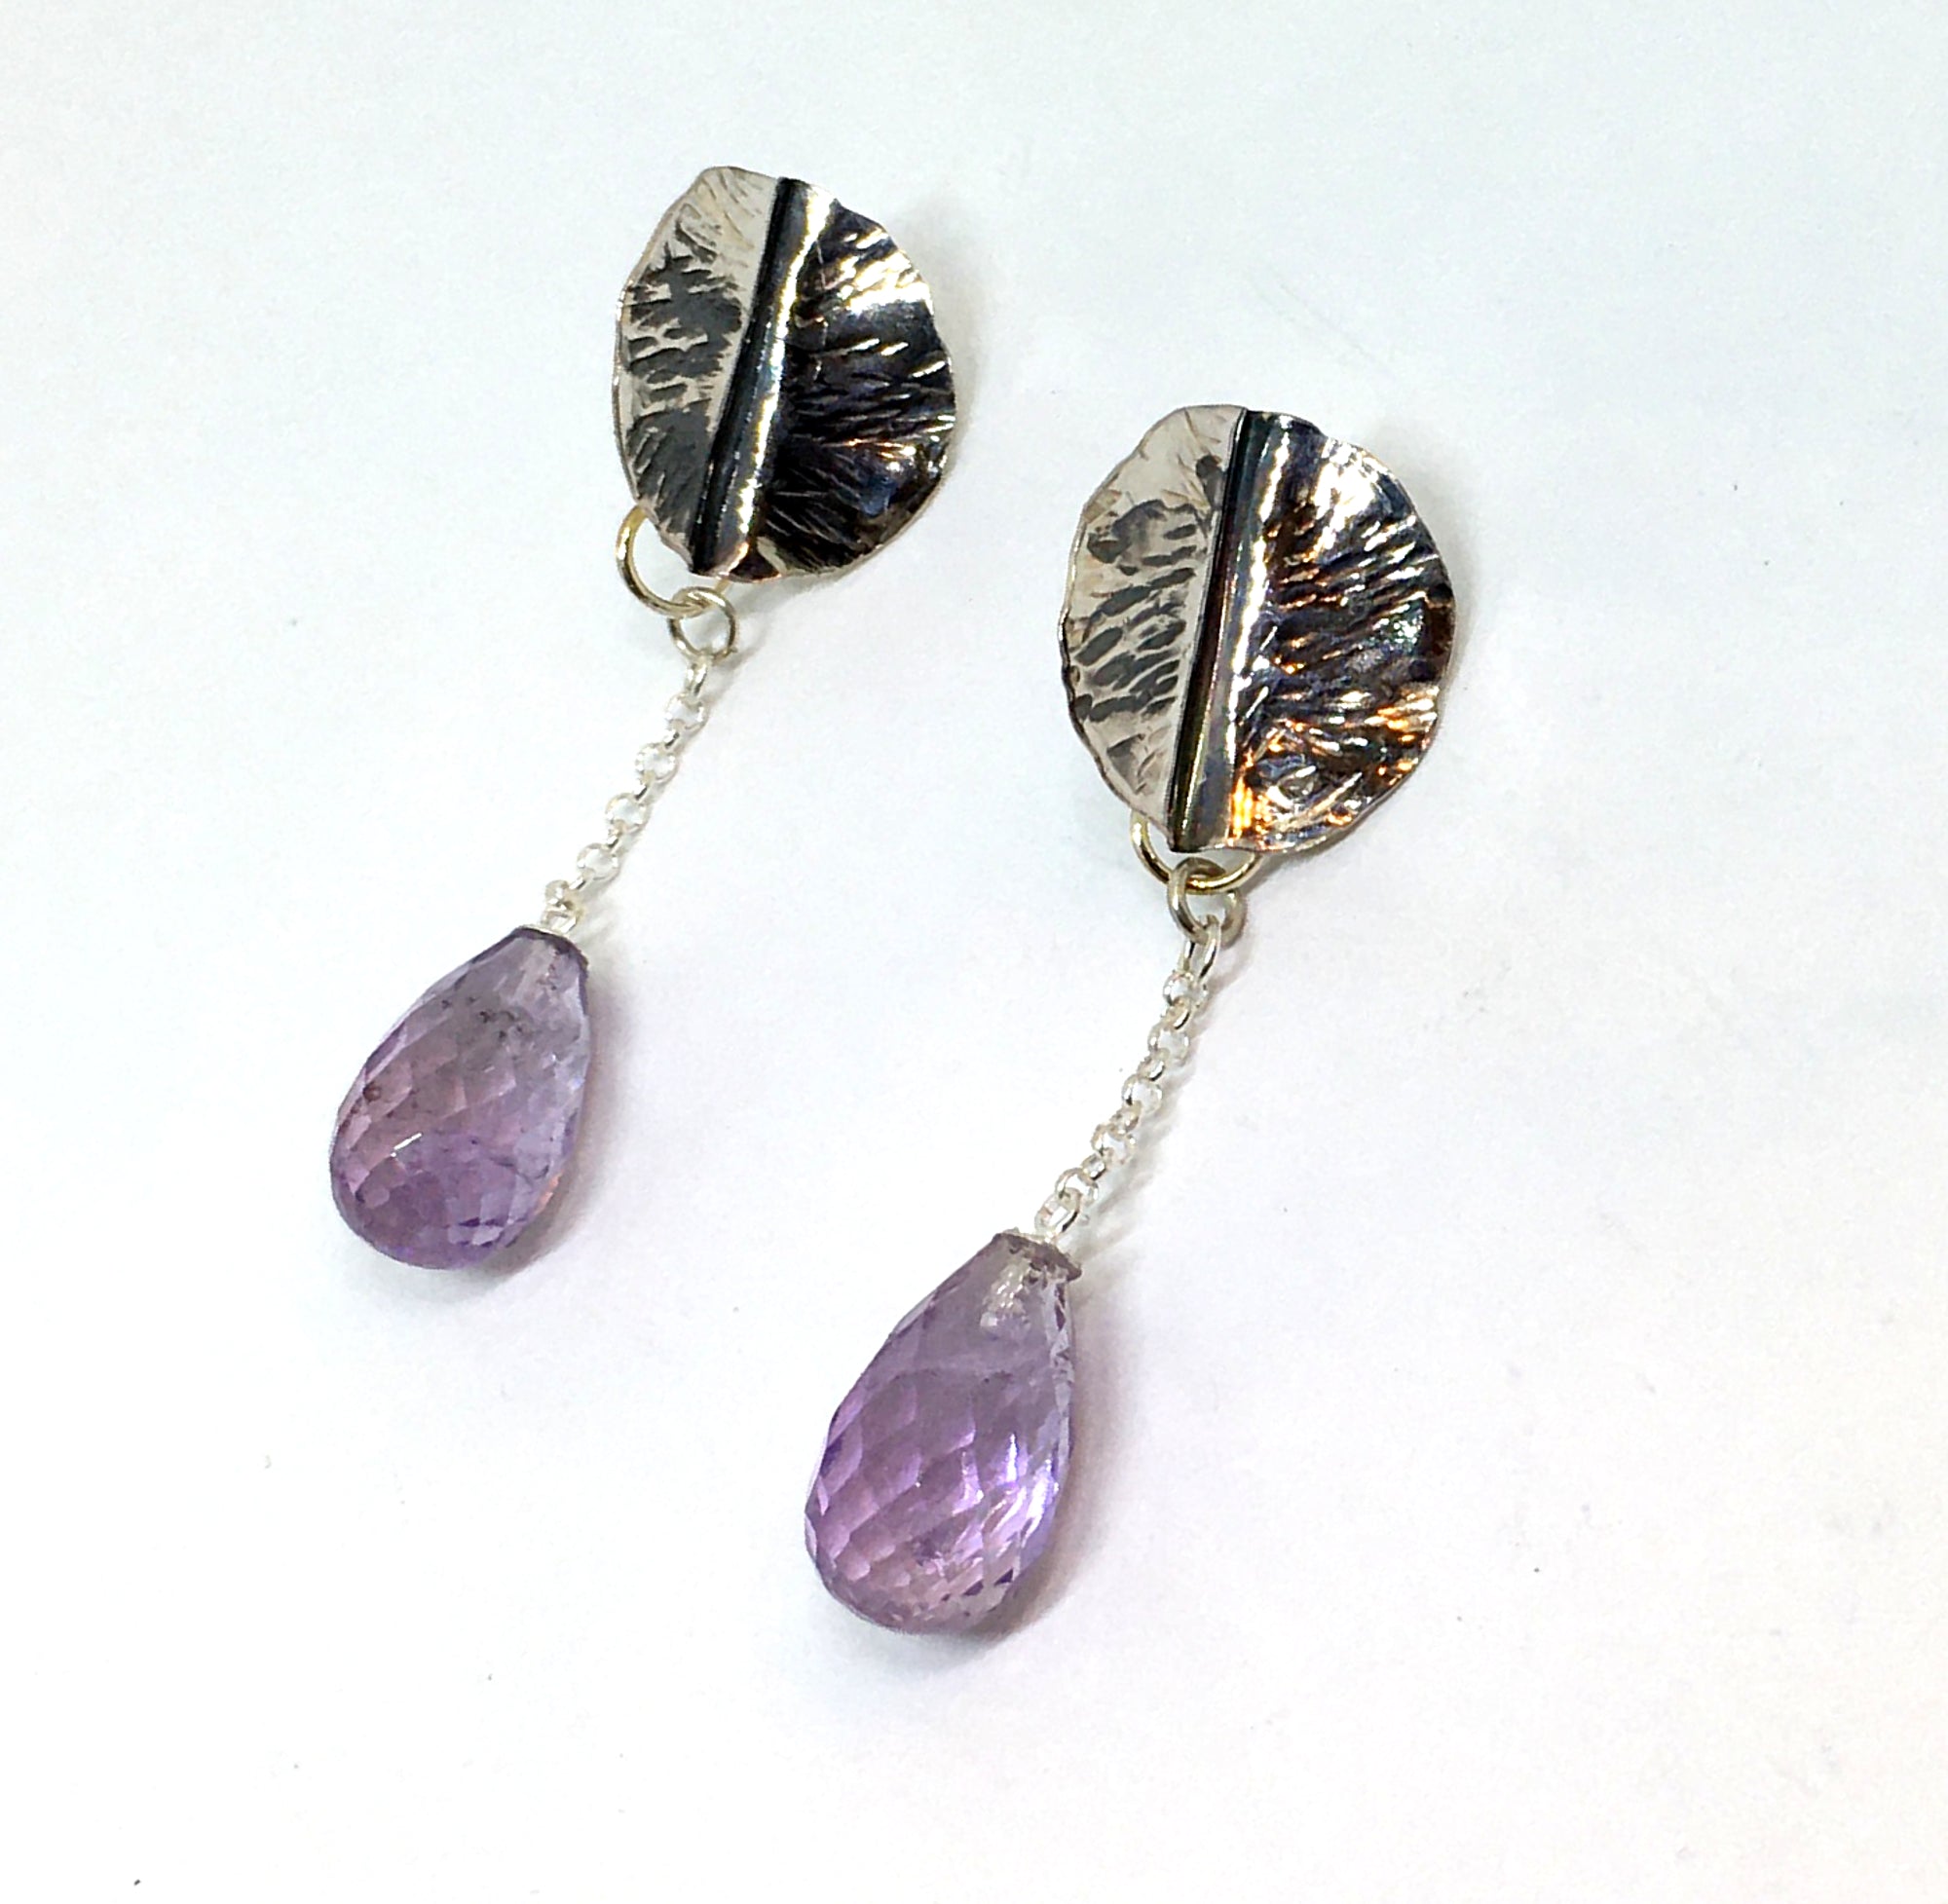 Handforged Leaf Earrings with faceted amethyst drops